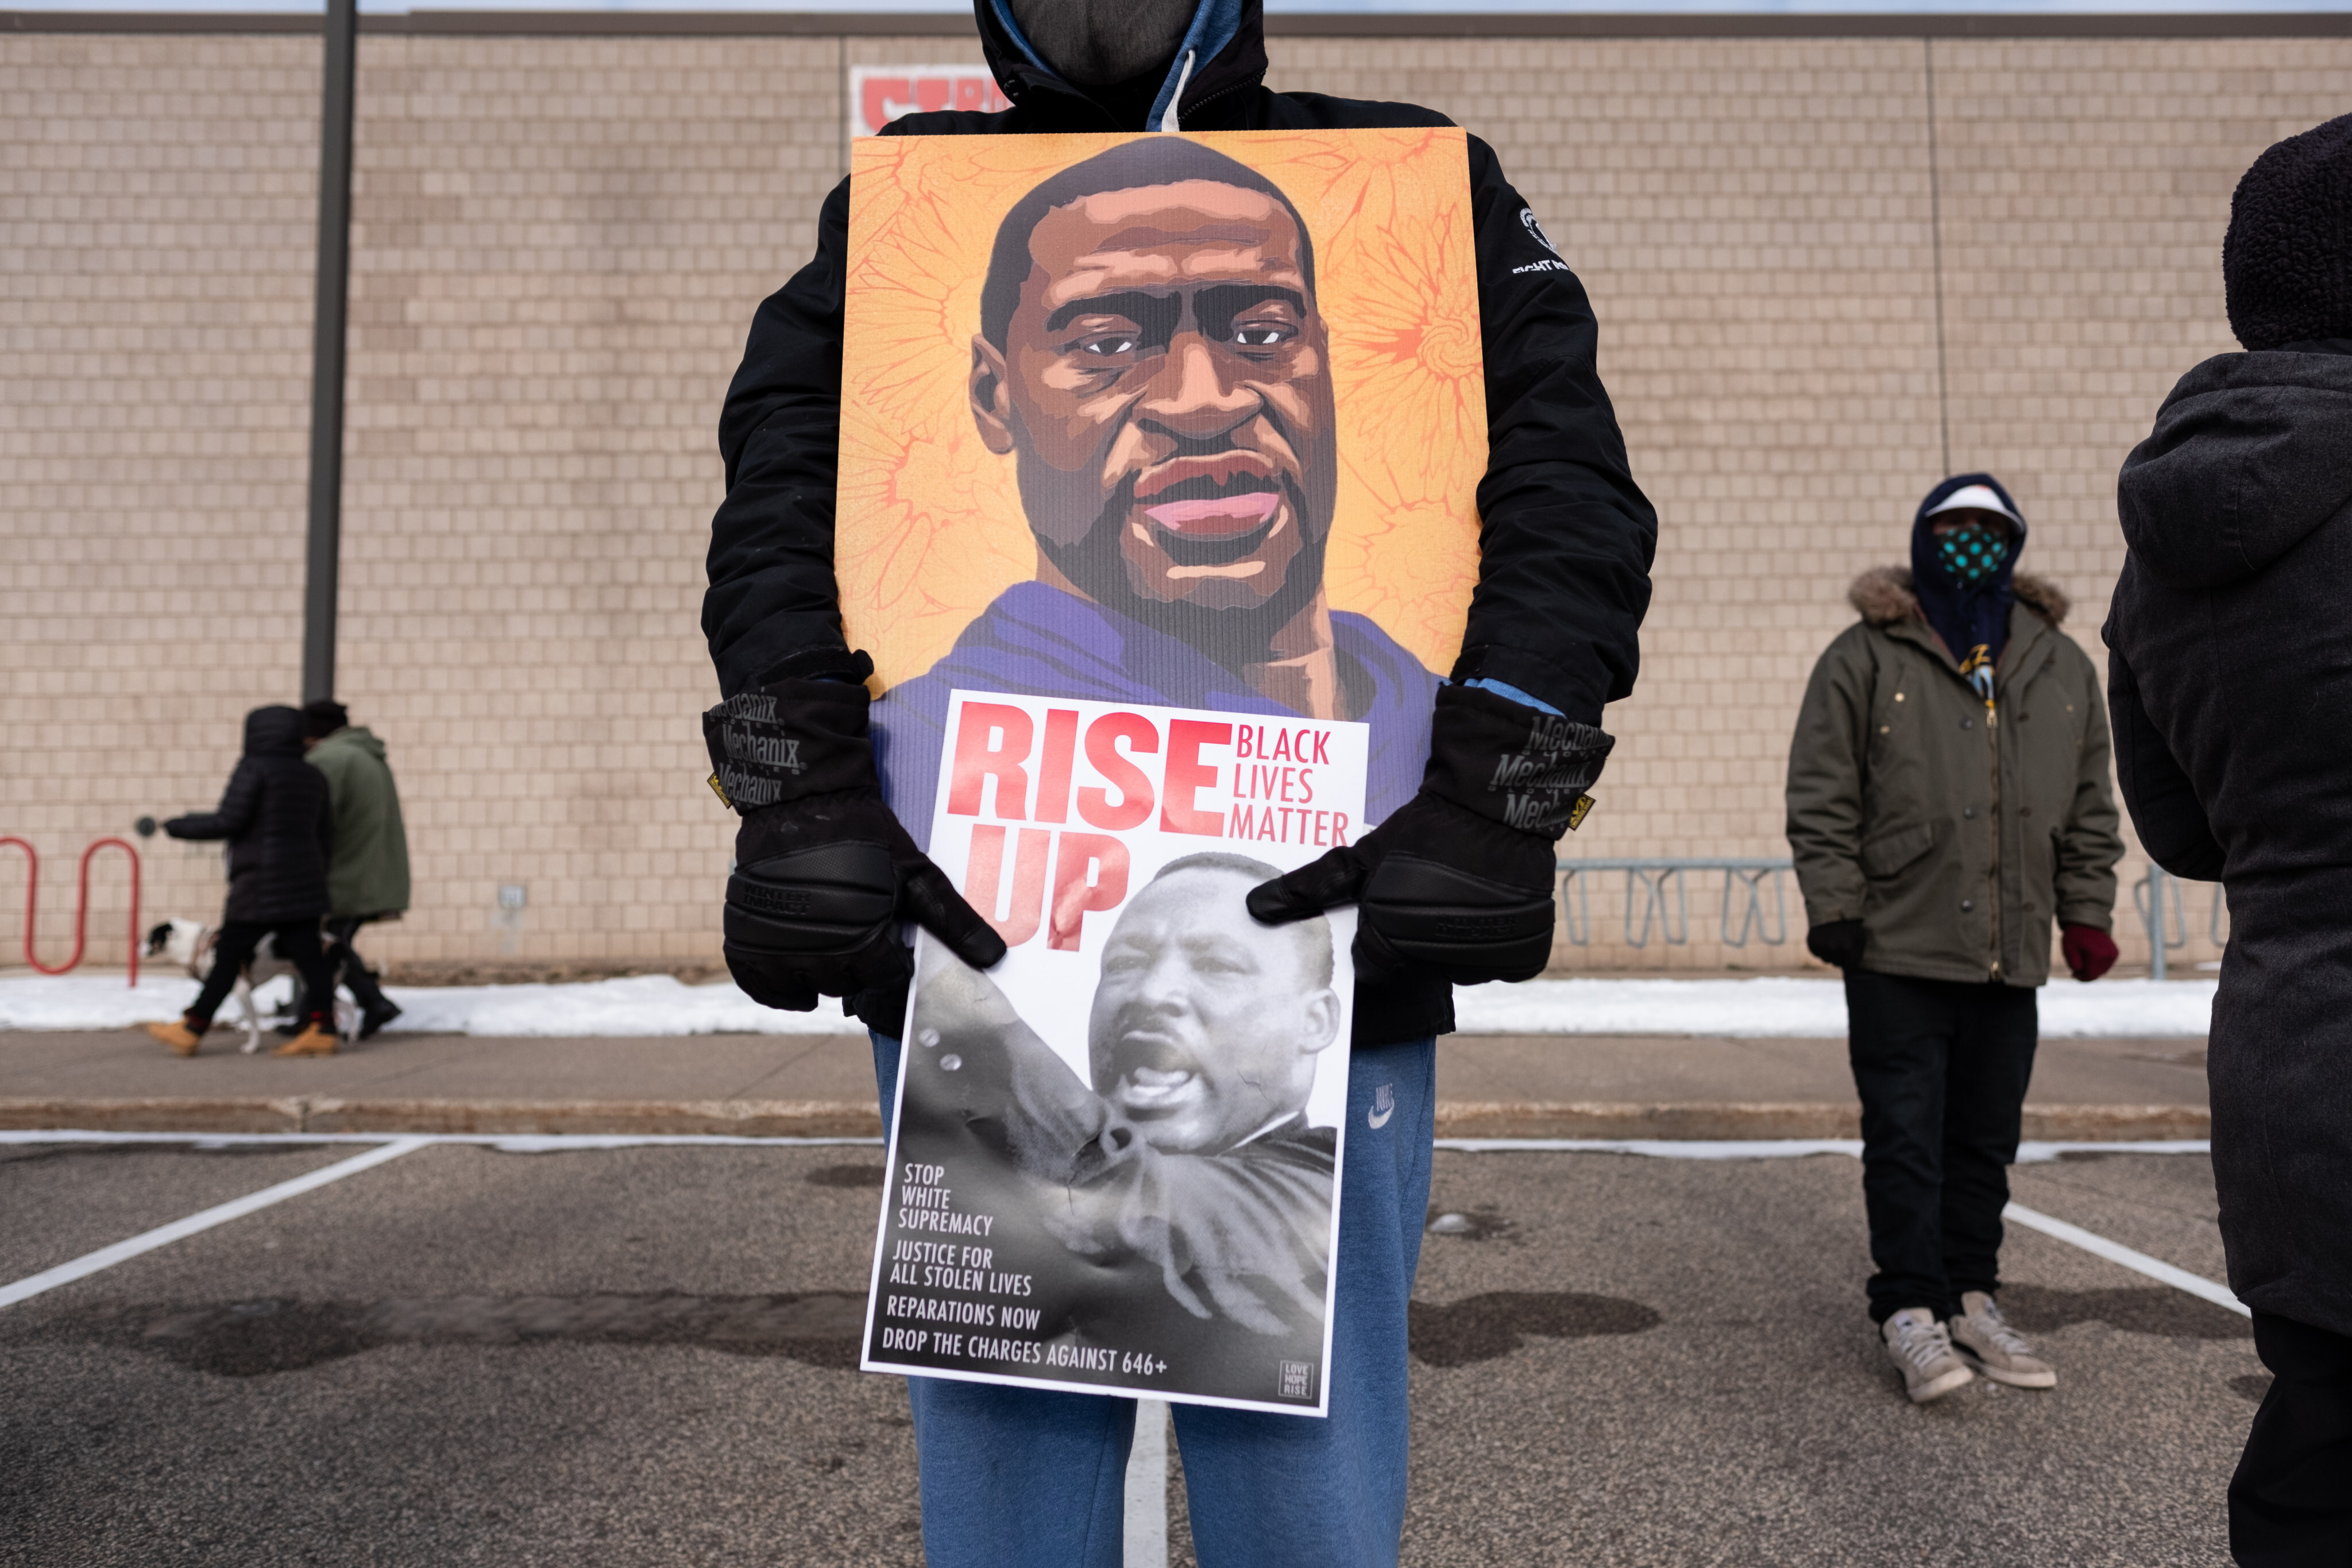 A protester holds a poster of George Floyd during a rally in St. Paul on Martin Luther King Jr. Day. January 18, 2021. Photo by Tim Evans/NurPhoto via Getty Images